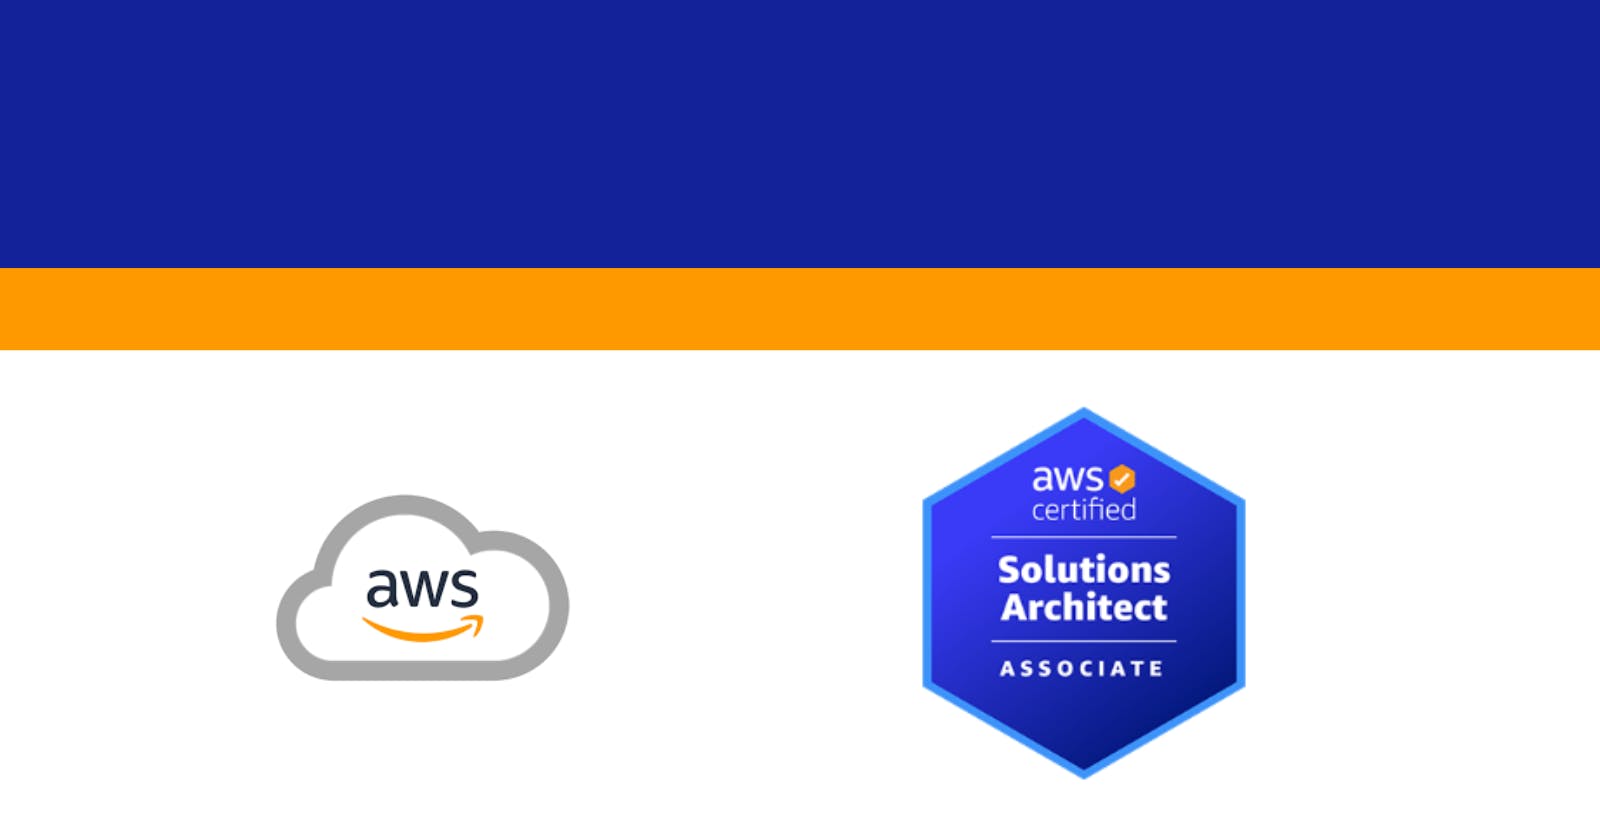 How I passed the AWS Certified Solutions Architect
Exam without any prior knowledge of cloud?